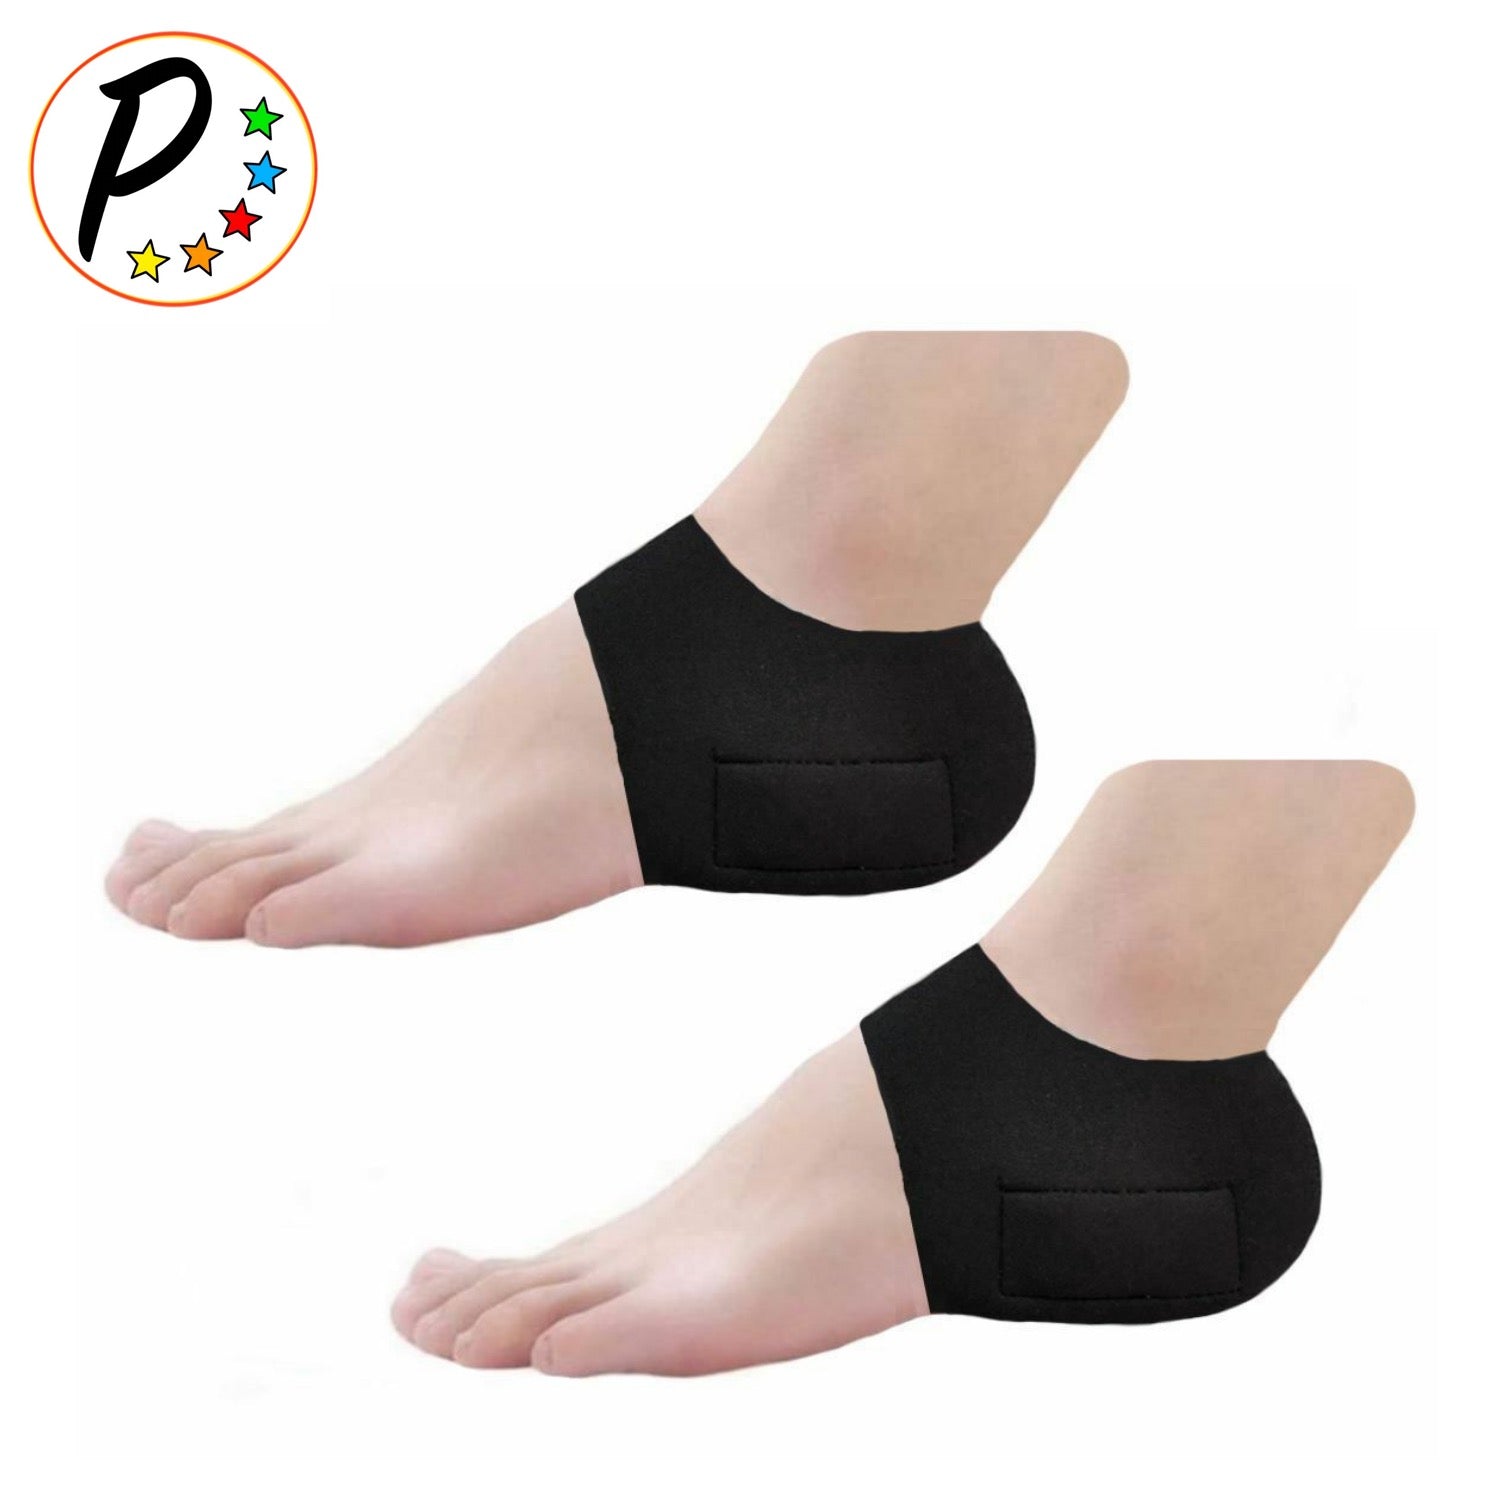 3 Silicon Cushions For FOOT PAIN, HEEL PAIN, PLANTAR FASCIITIS, FLAT FEET,  FOOT PAIN RELIEF-TRY THIS - YouTube